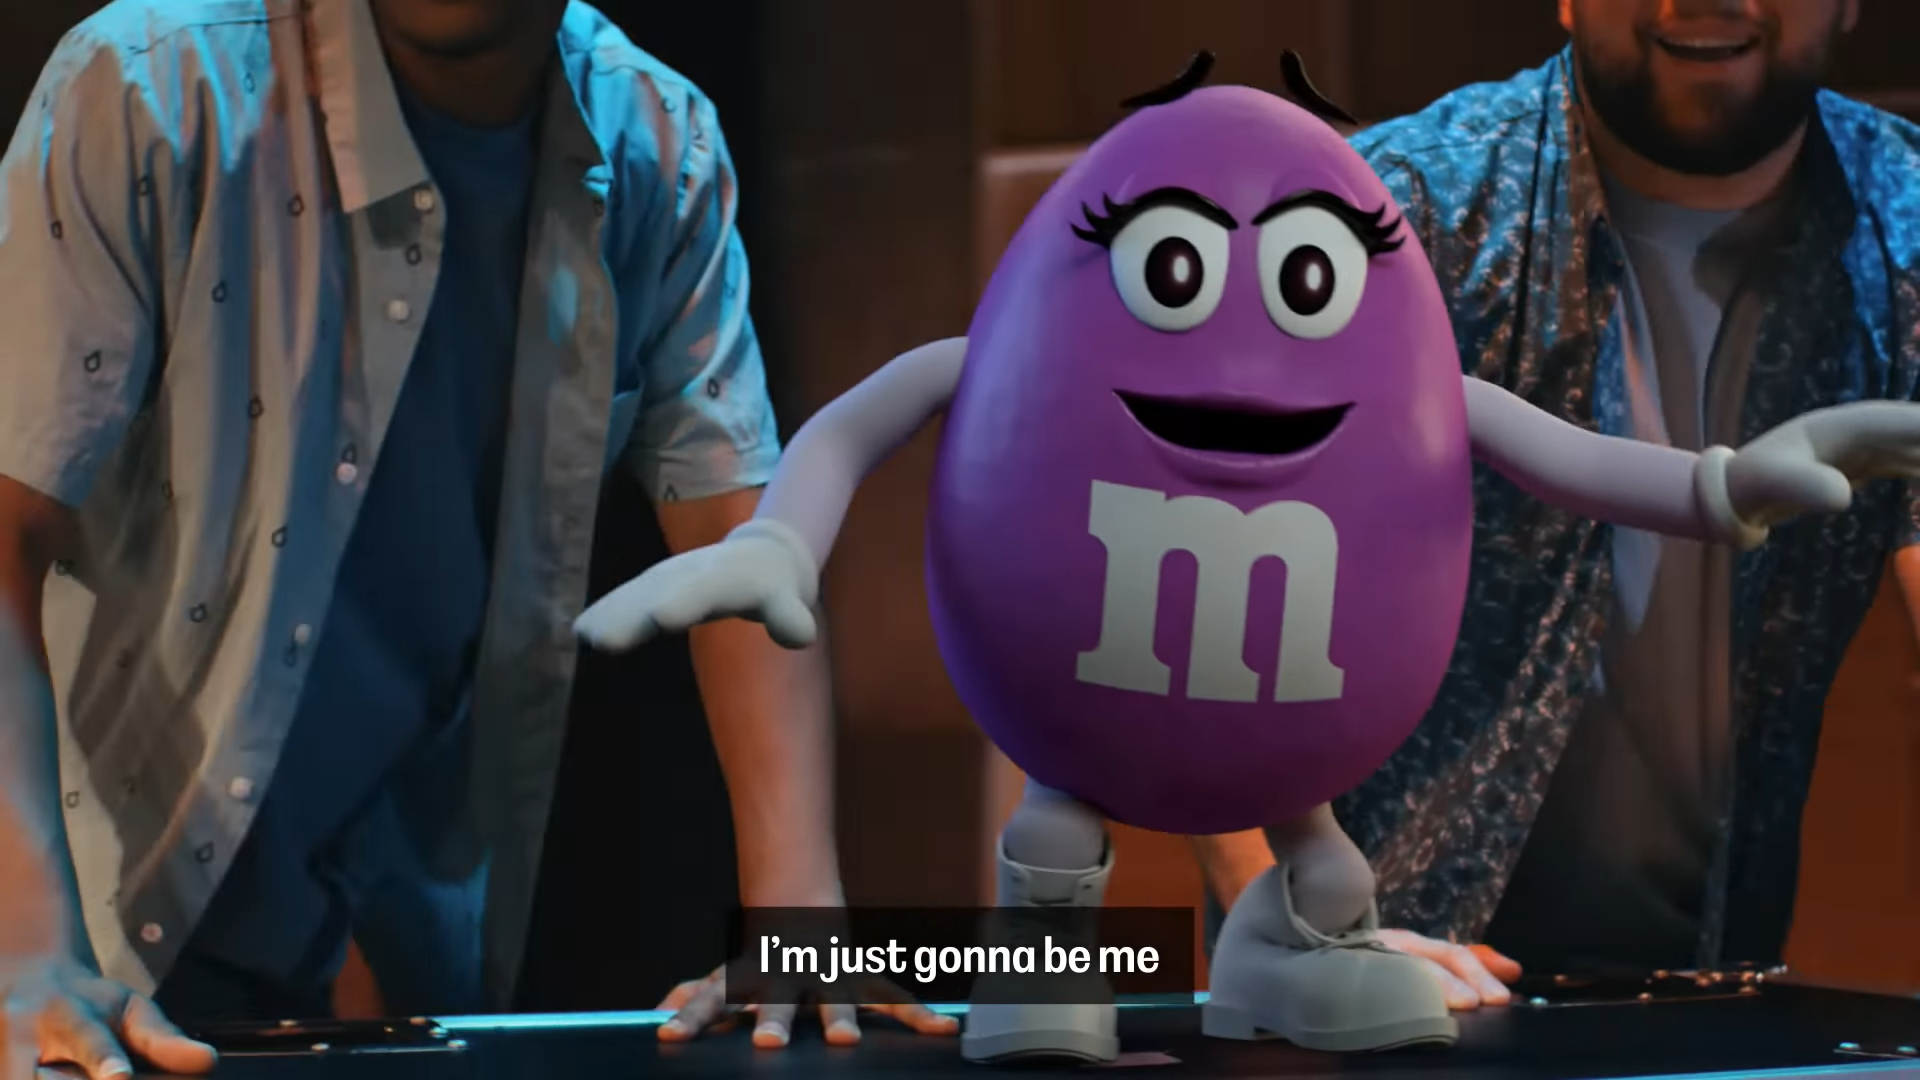 The Reason Why There Isn't a Purple M&M